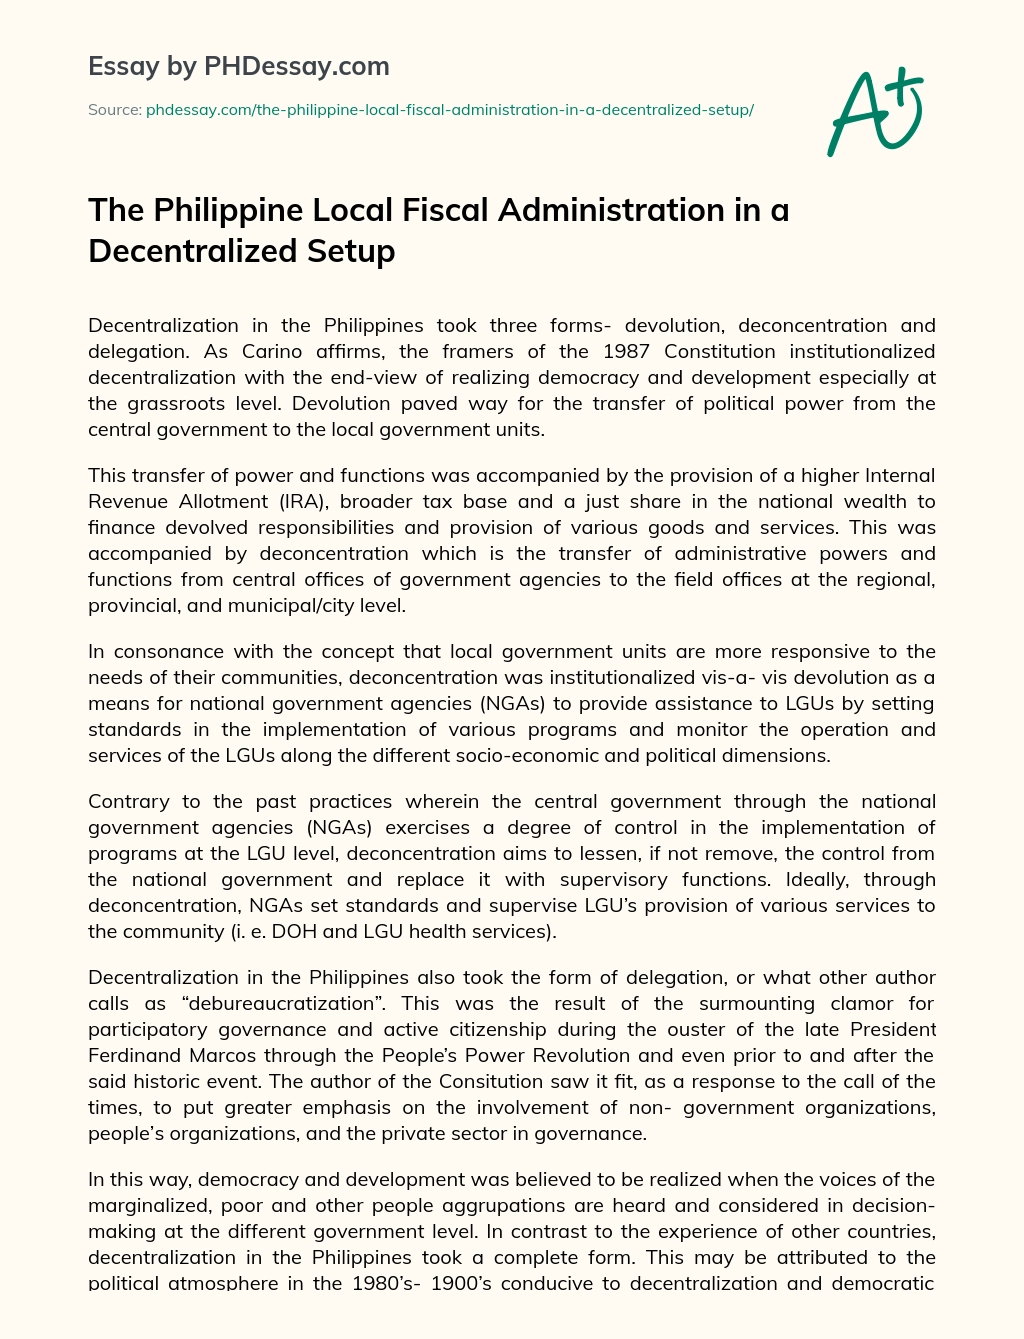 The Philippine Local Fiscal Administration in a Decentralized Setup essay